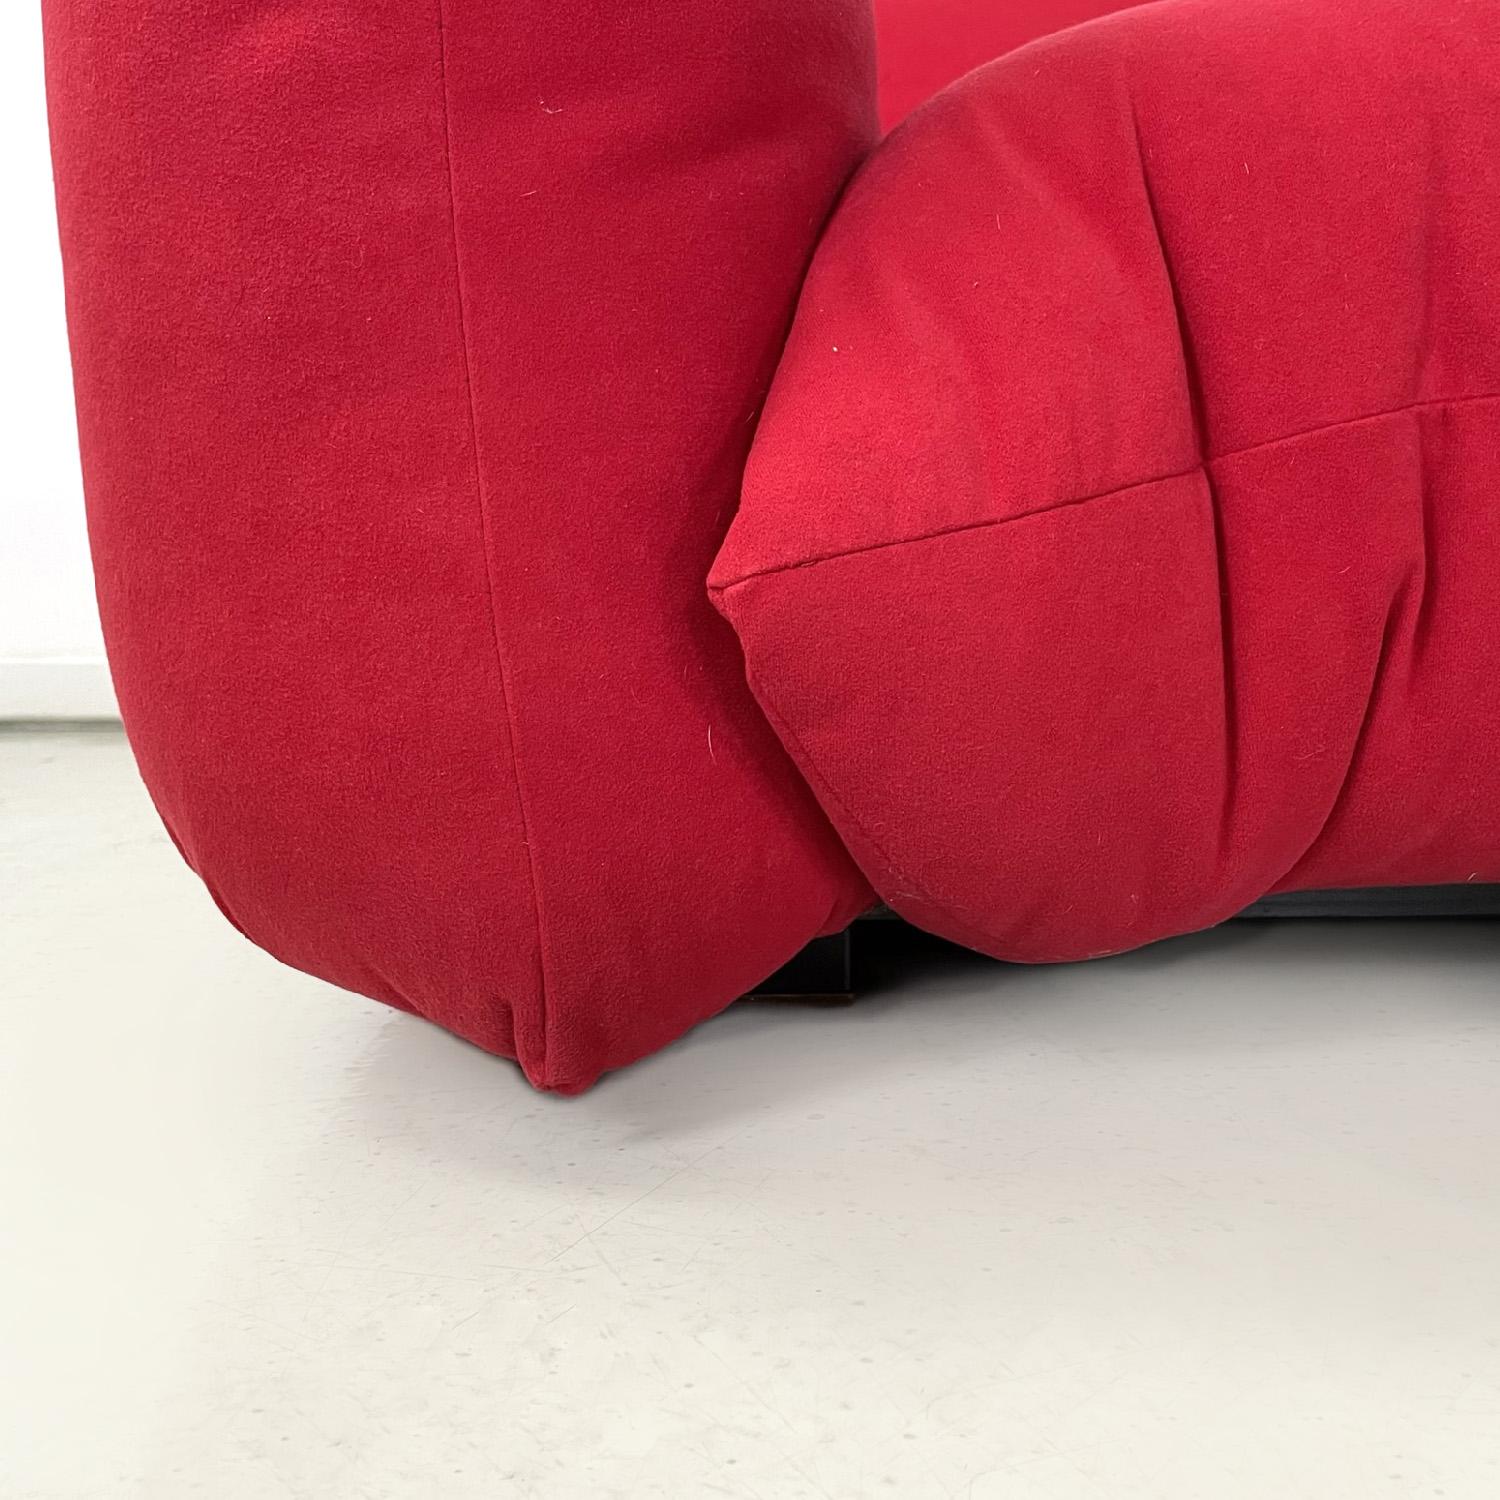 Italian modern red armchair Marenco by Mario Marenco for Arflex, 1970s For Sale 1